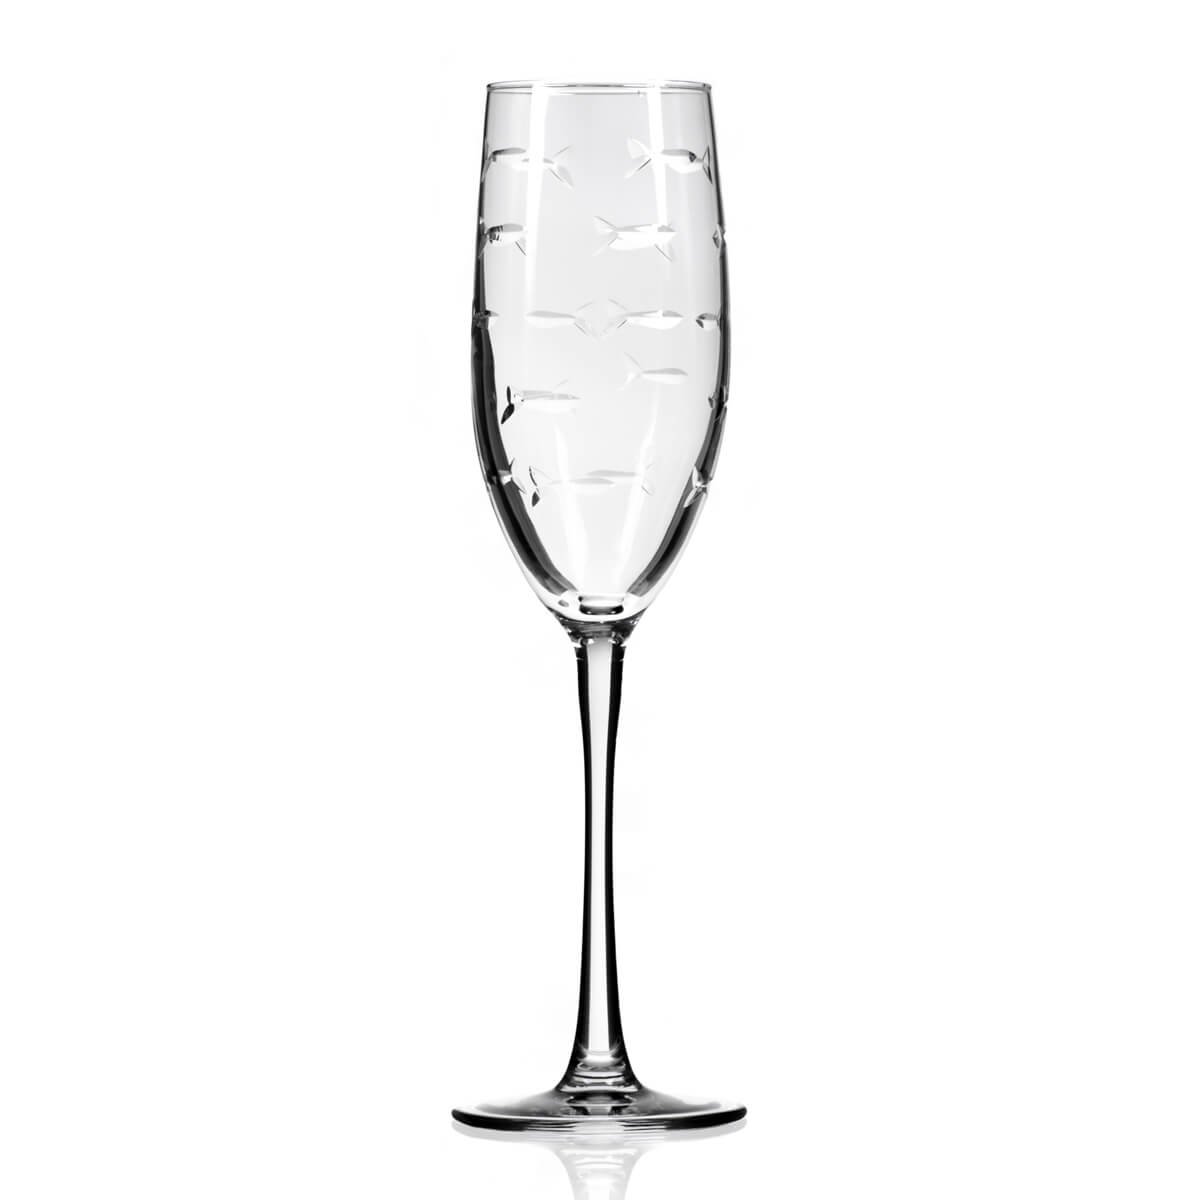 26140 - School of Fish Champagne Flute (6) - $17/each